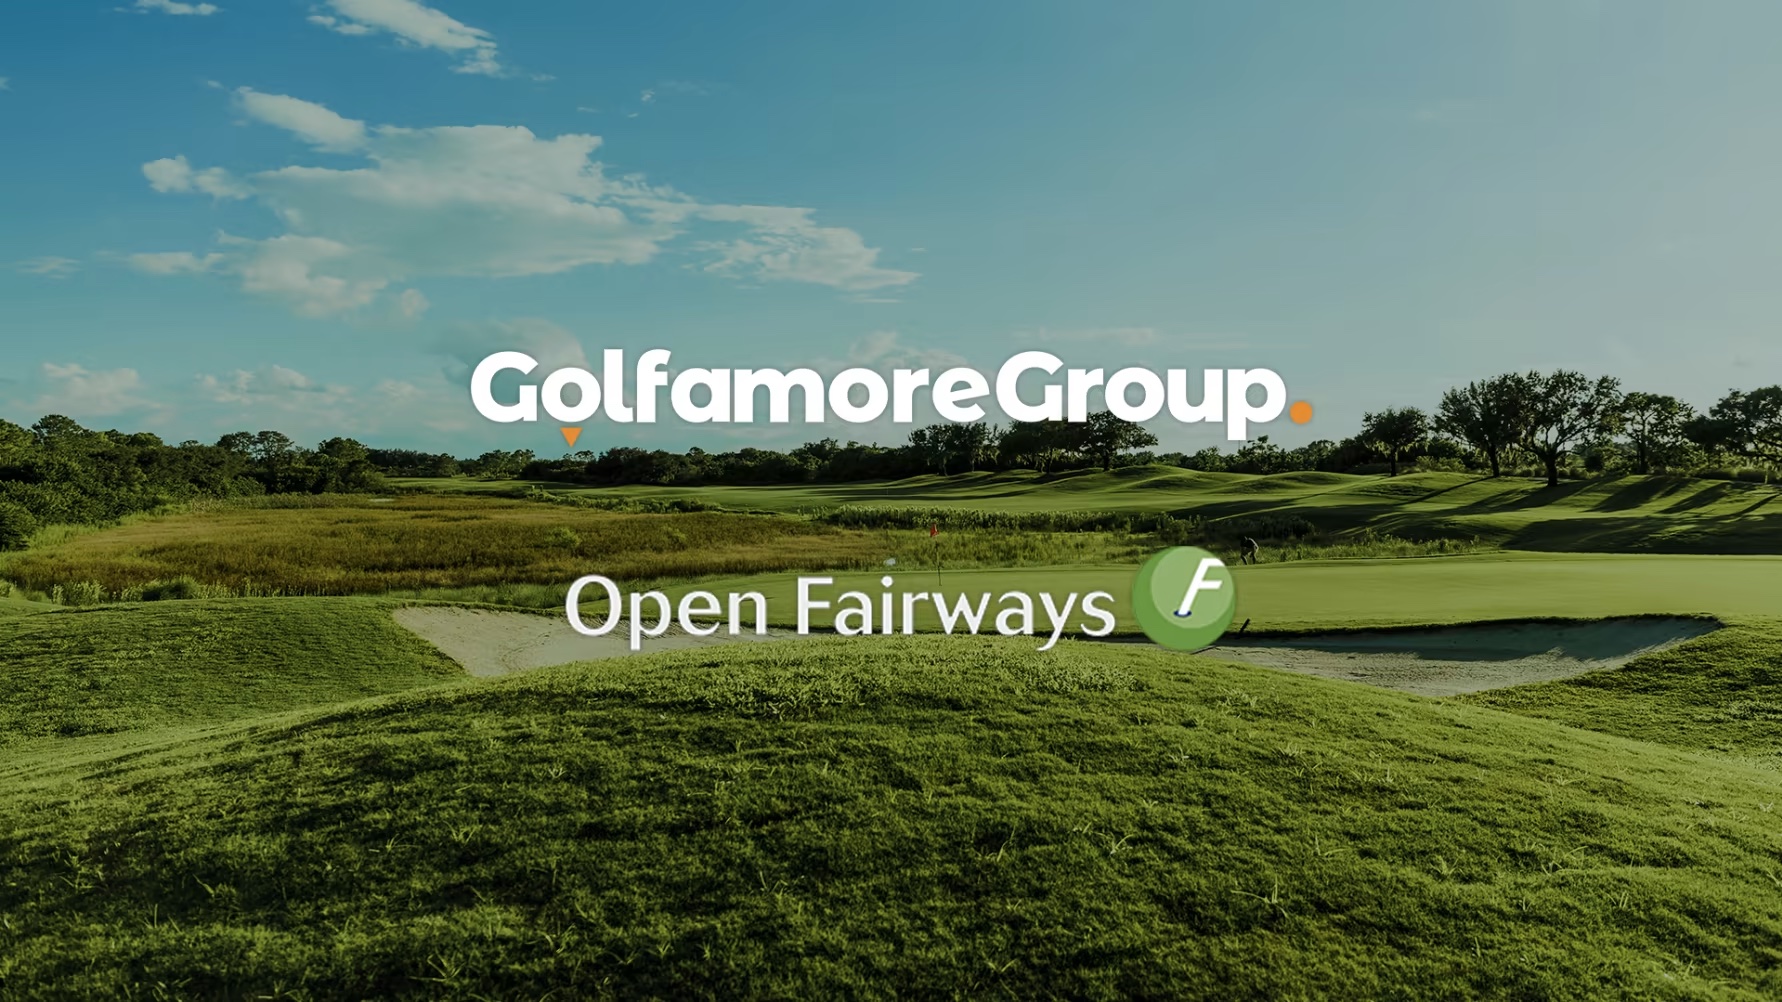 Top 5 Golfamore Courses to Experience